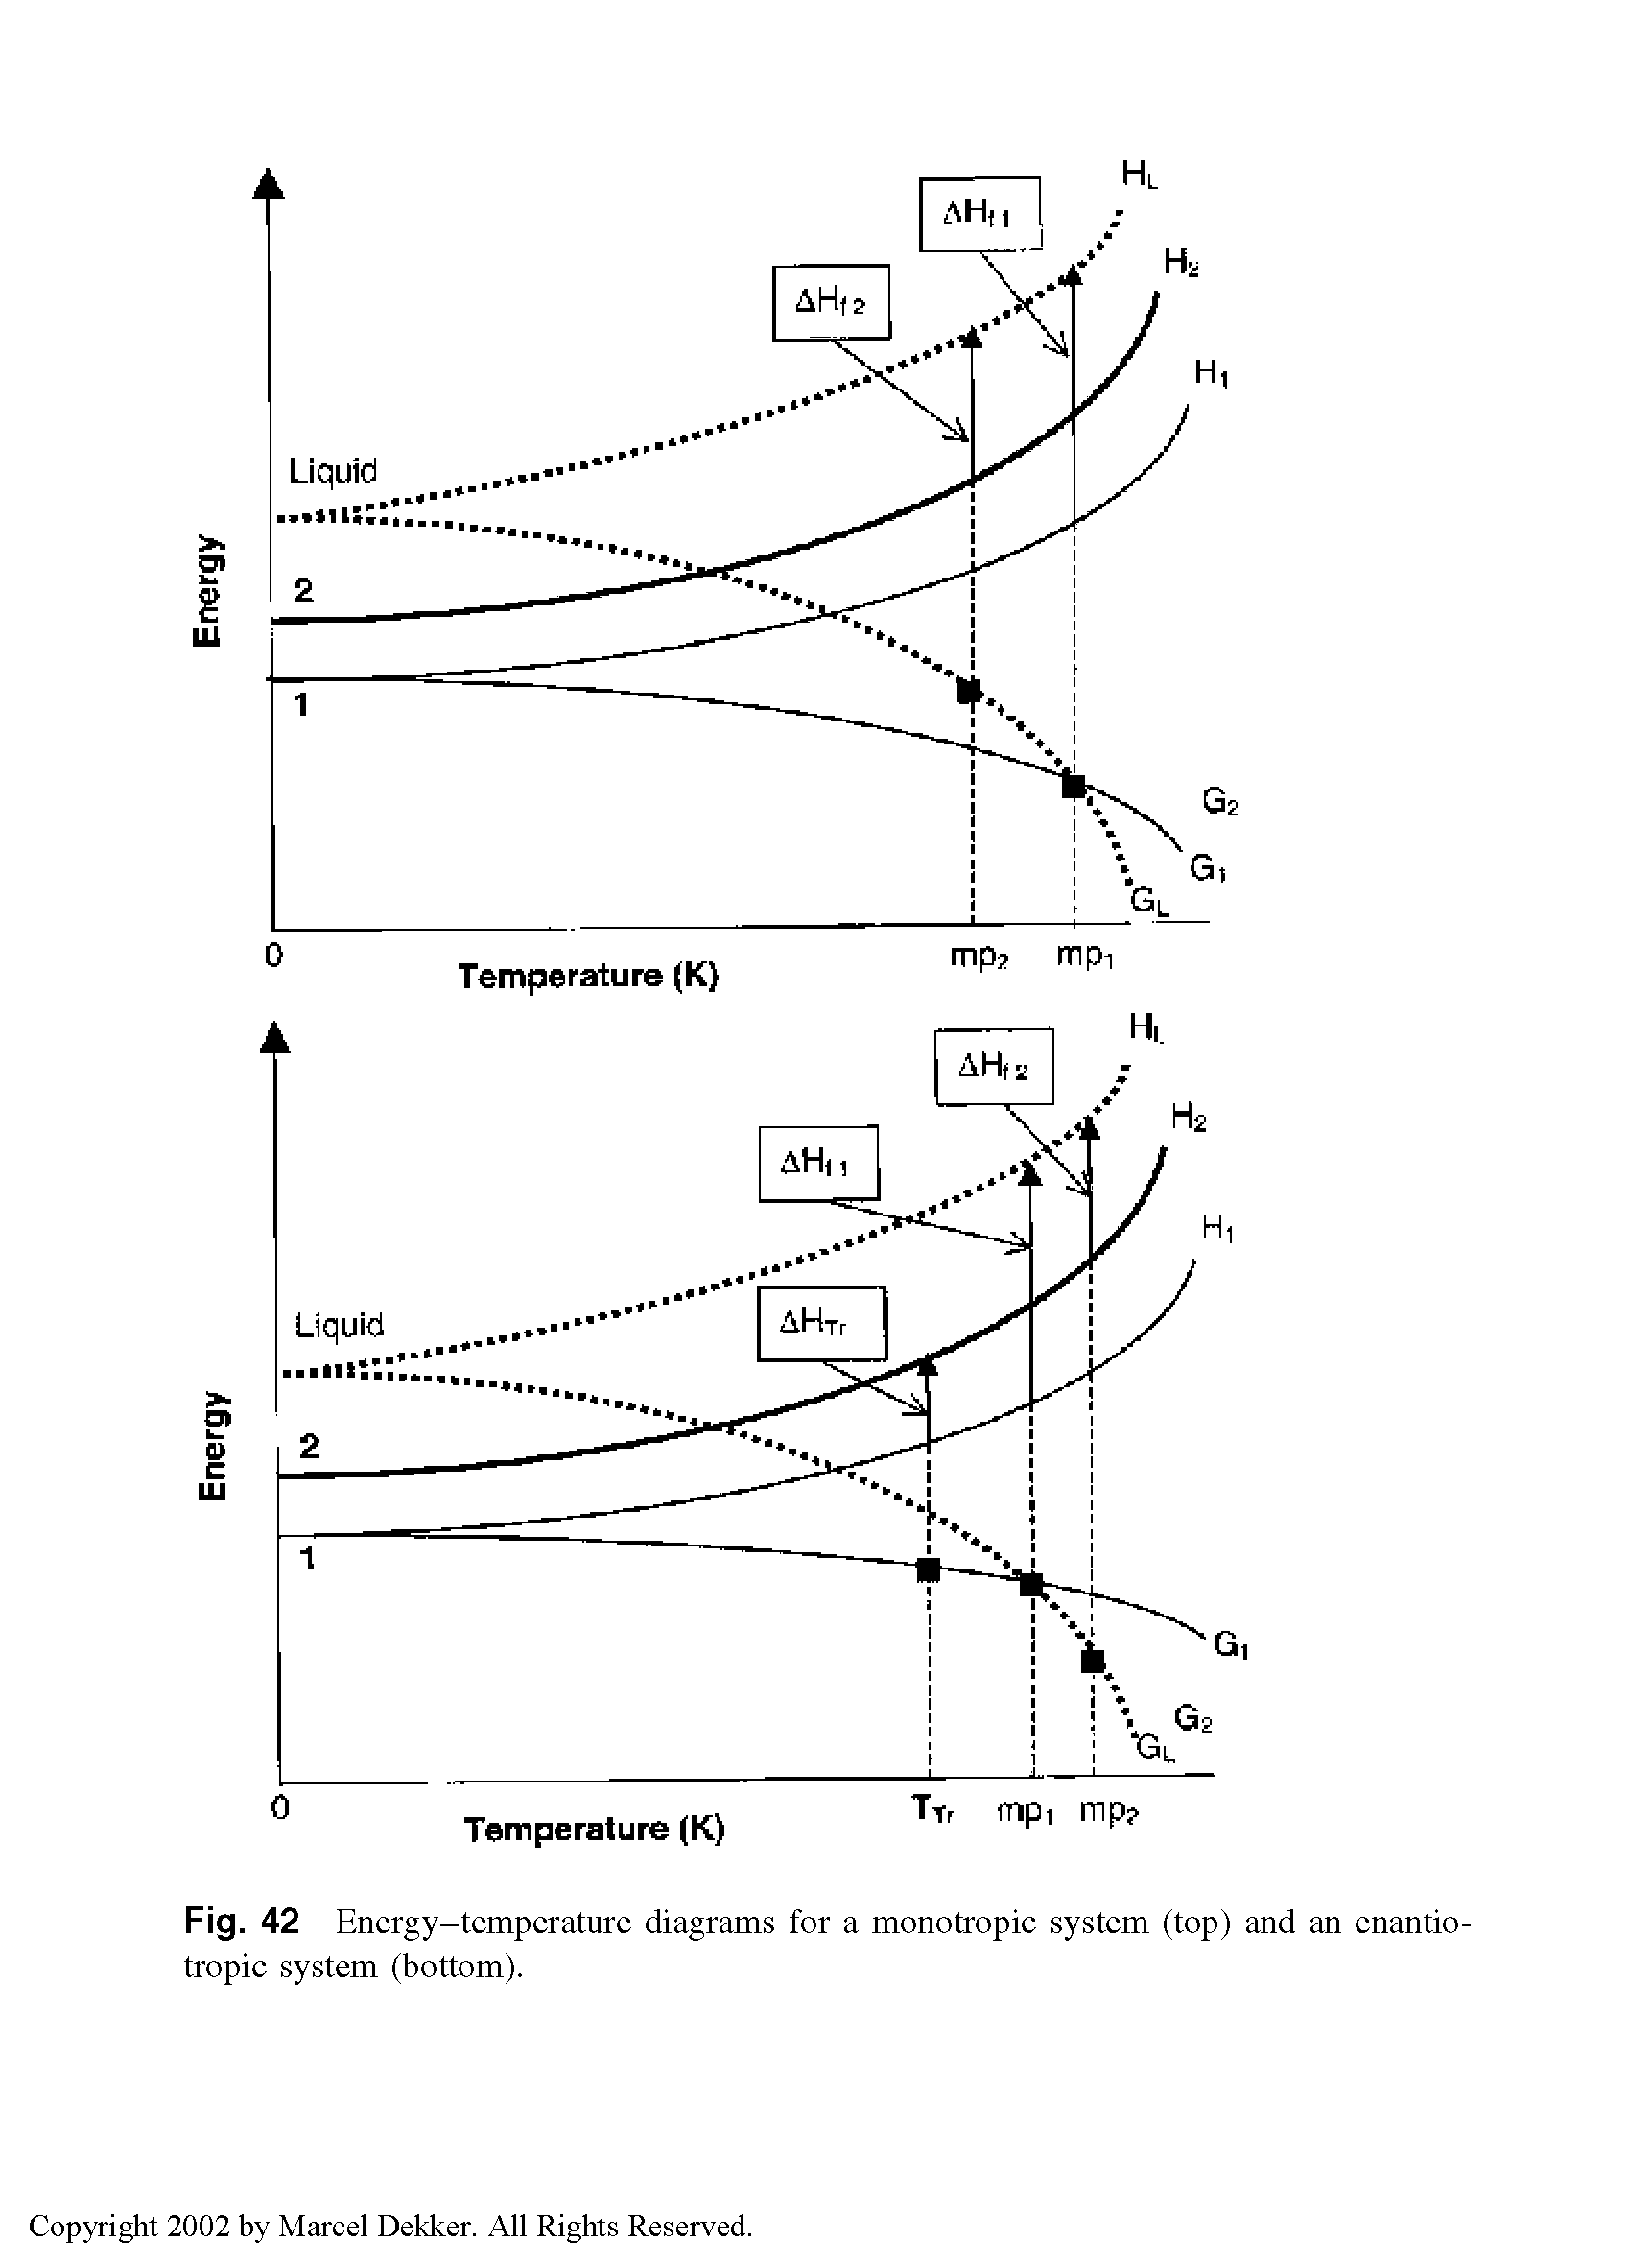 Fig. 42 Energy-temperature diagrams for a monotropic system (top) and an enantio-tropic system (bottom).